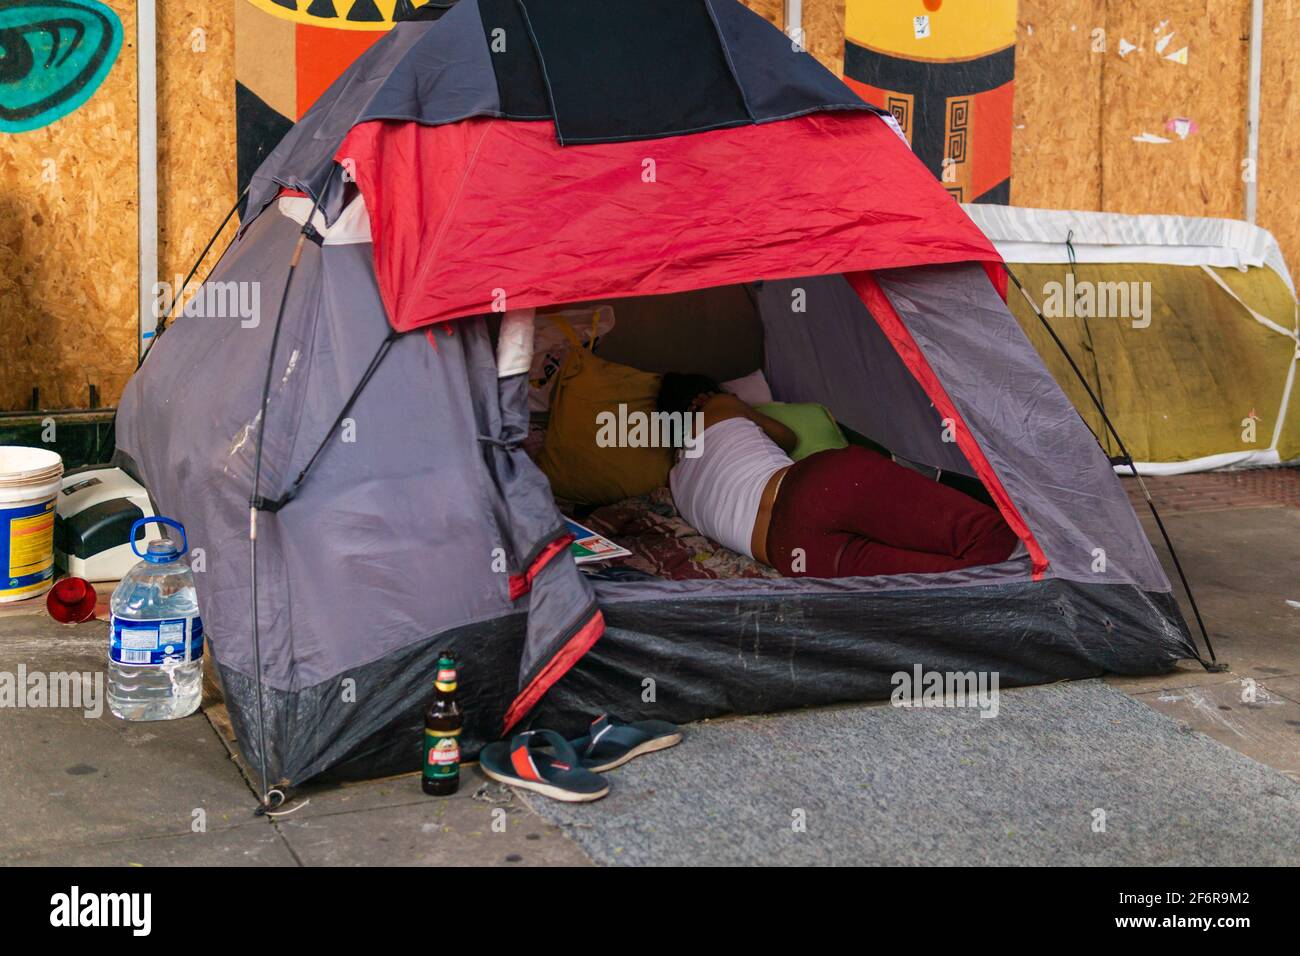 Brazilian female homeless sleeping in a camping tent on the sidewalk of a street. Stock Photo